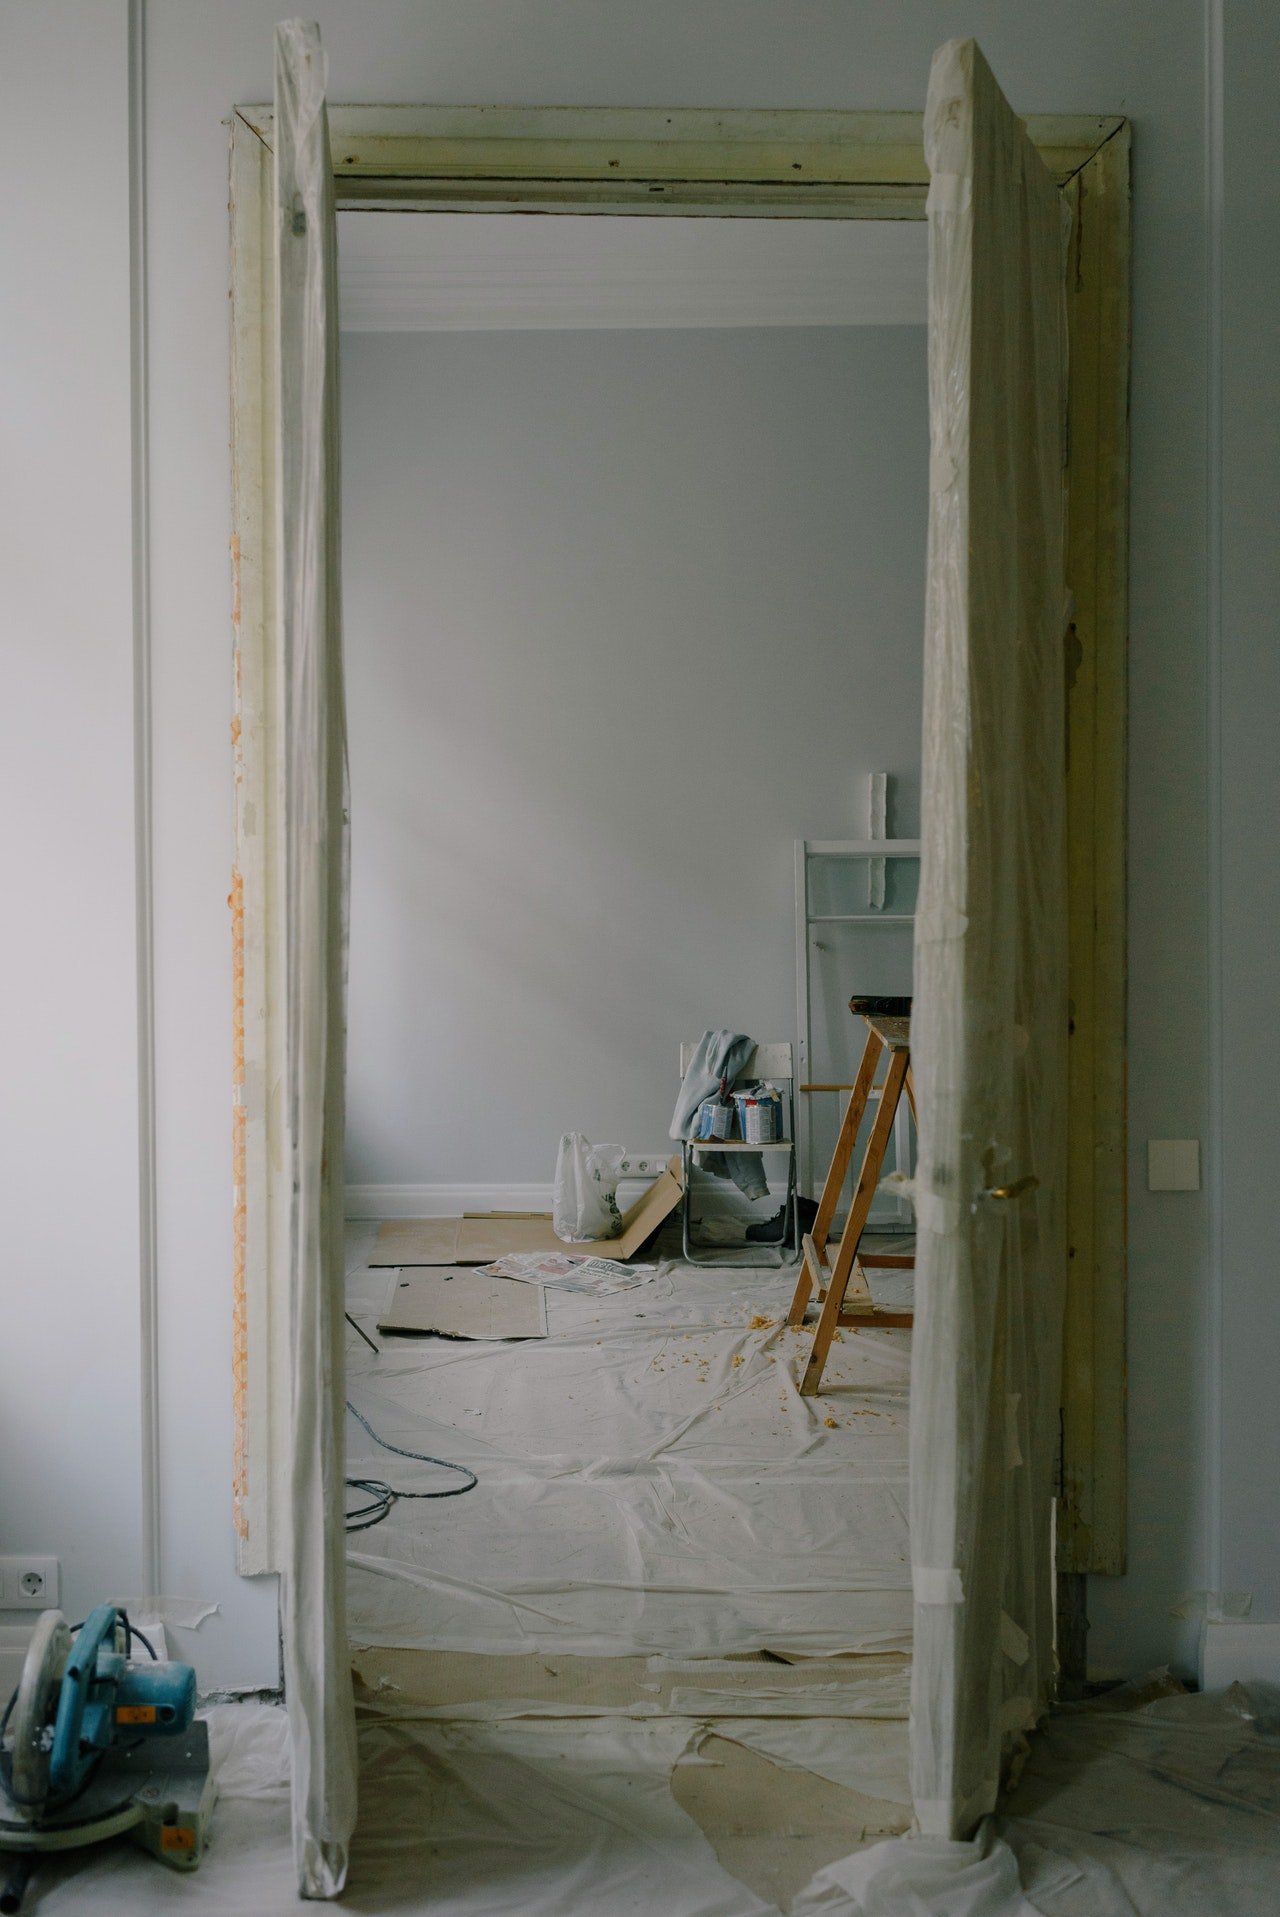 Photo of a building undergoing renovation | Photo: Pexels